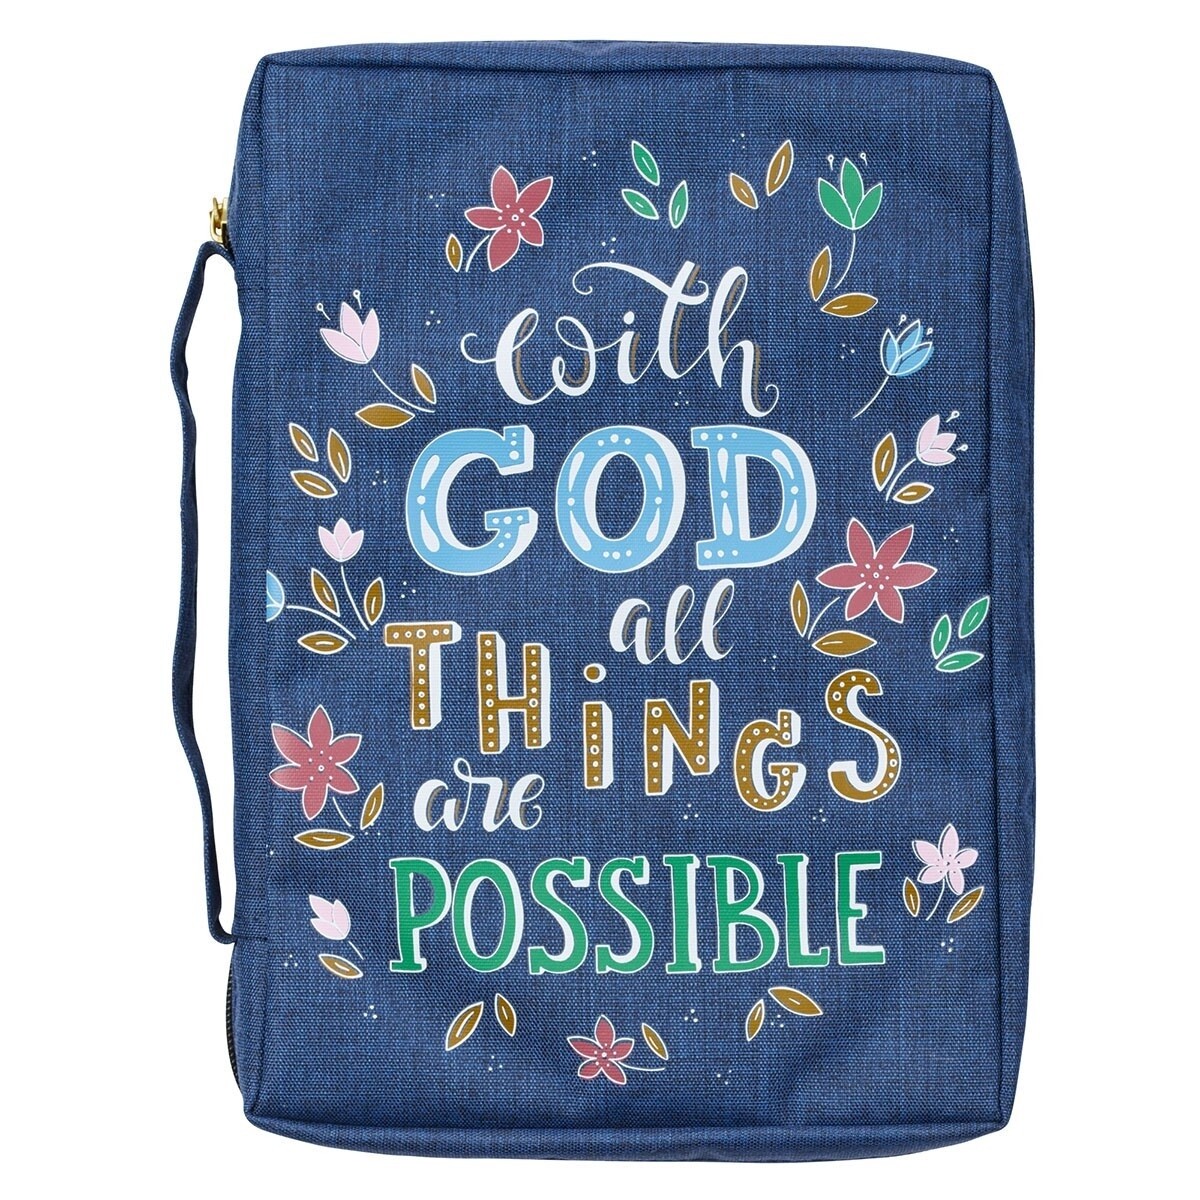 With God All Things Are Possible-Navy Floral Value Bible Cover Matthew 19:26